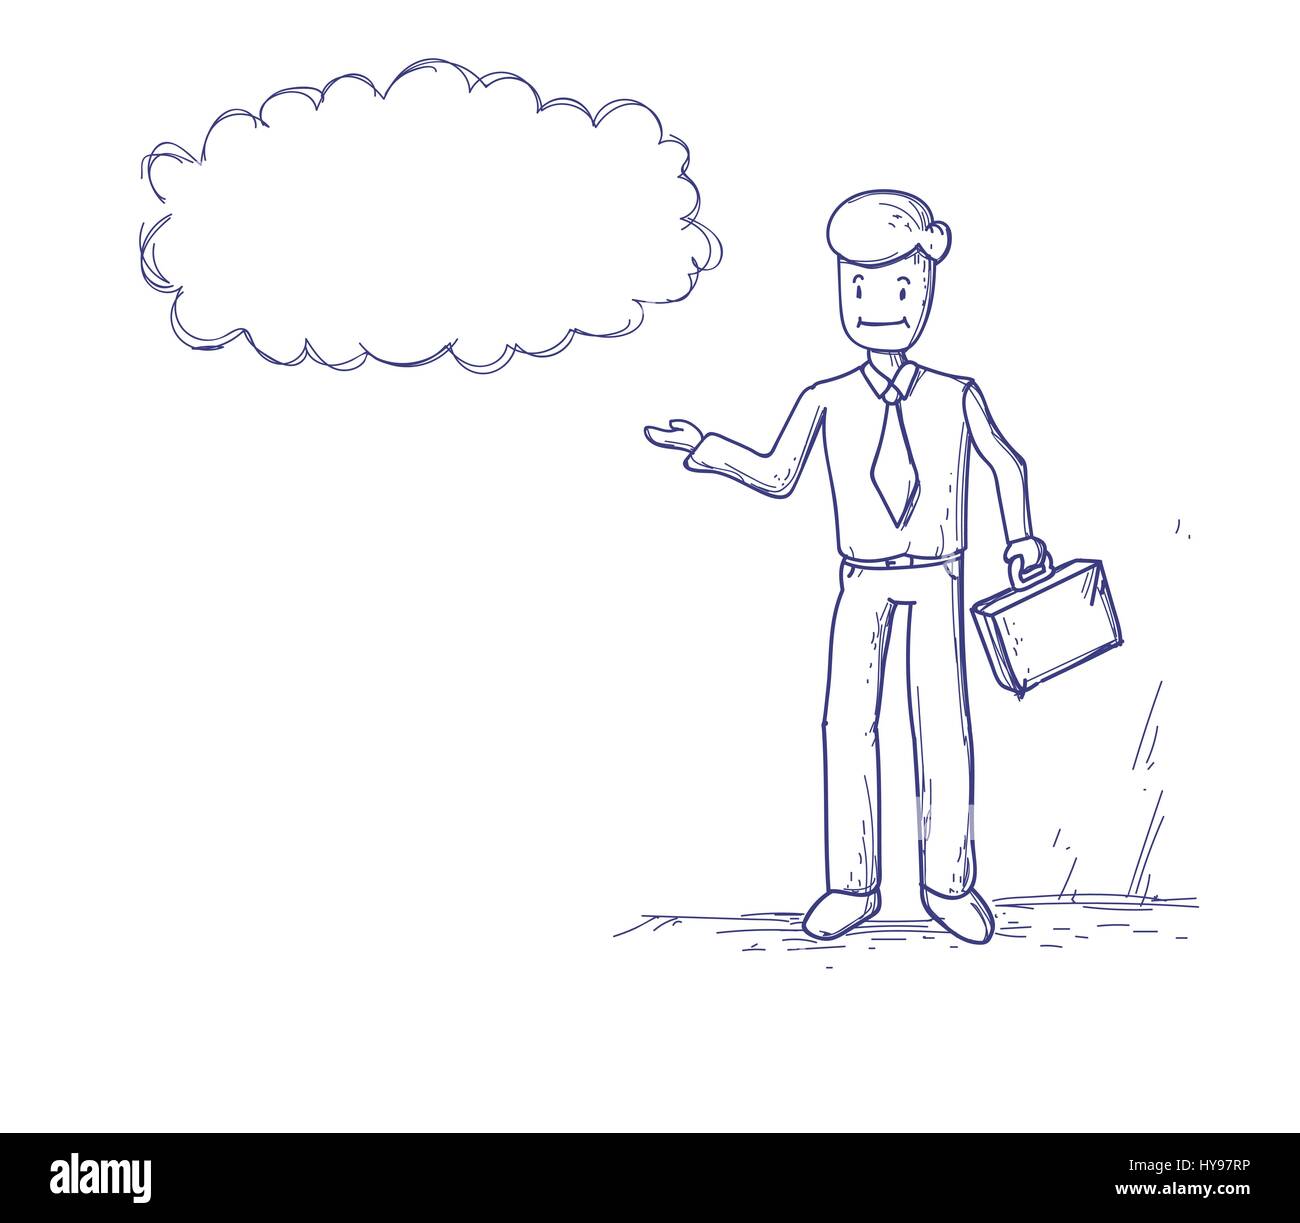 Business Man Ponder Thinking Cloud Chat Bubble Stock Vector